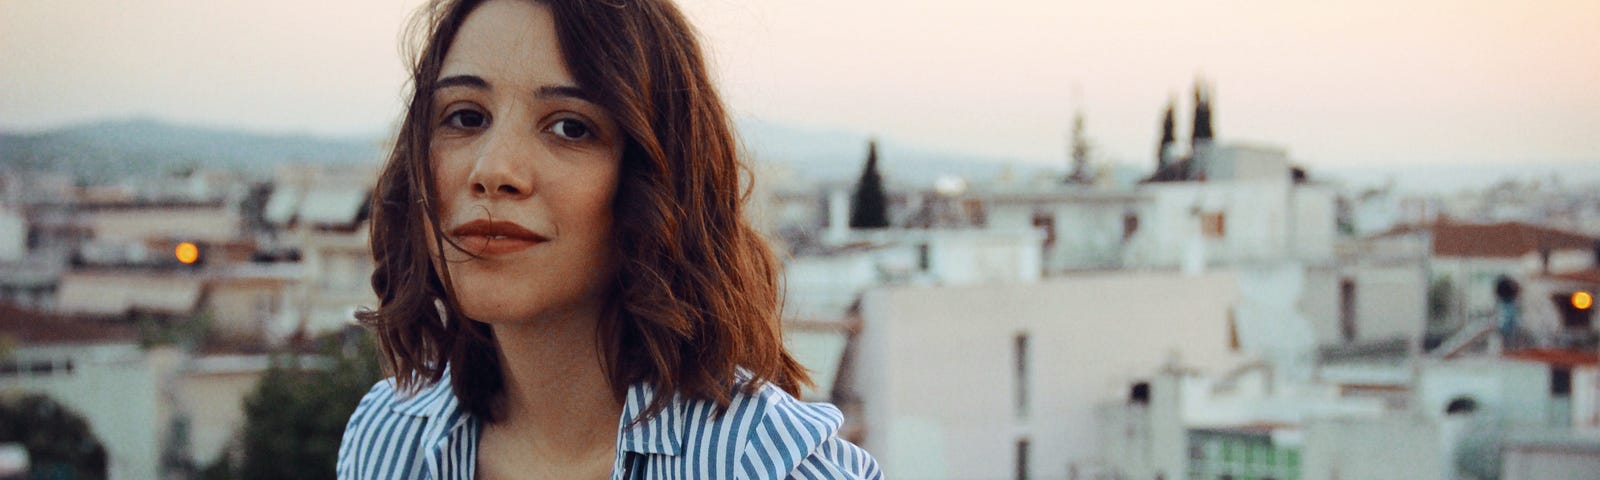 A mid-shot of a young Hispanic woman standing with her back leaning against a balcony. The white villas and pale pink sky behind her suggest she is in a hot climate, maybe Spain. She’s wearing an open stripy white and blue shirt and her mid-length brown hair blow gently as she smiles knowingly at the camera. I Love Your Honesty, Not Your Sales Tactics - Food for thought for all online entrepreneurs and business owners when pitching your digital product. This will actually make me want to buy it.